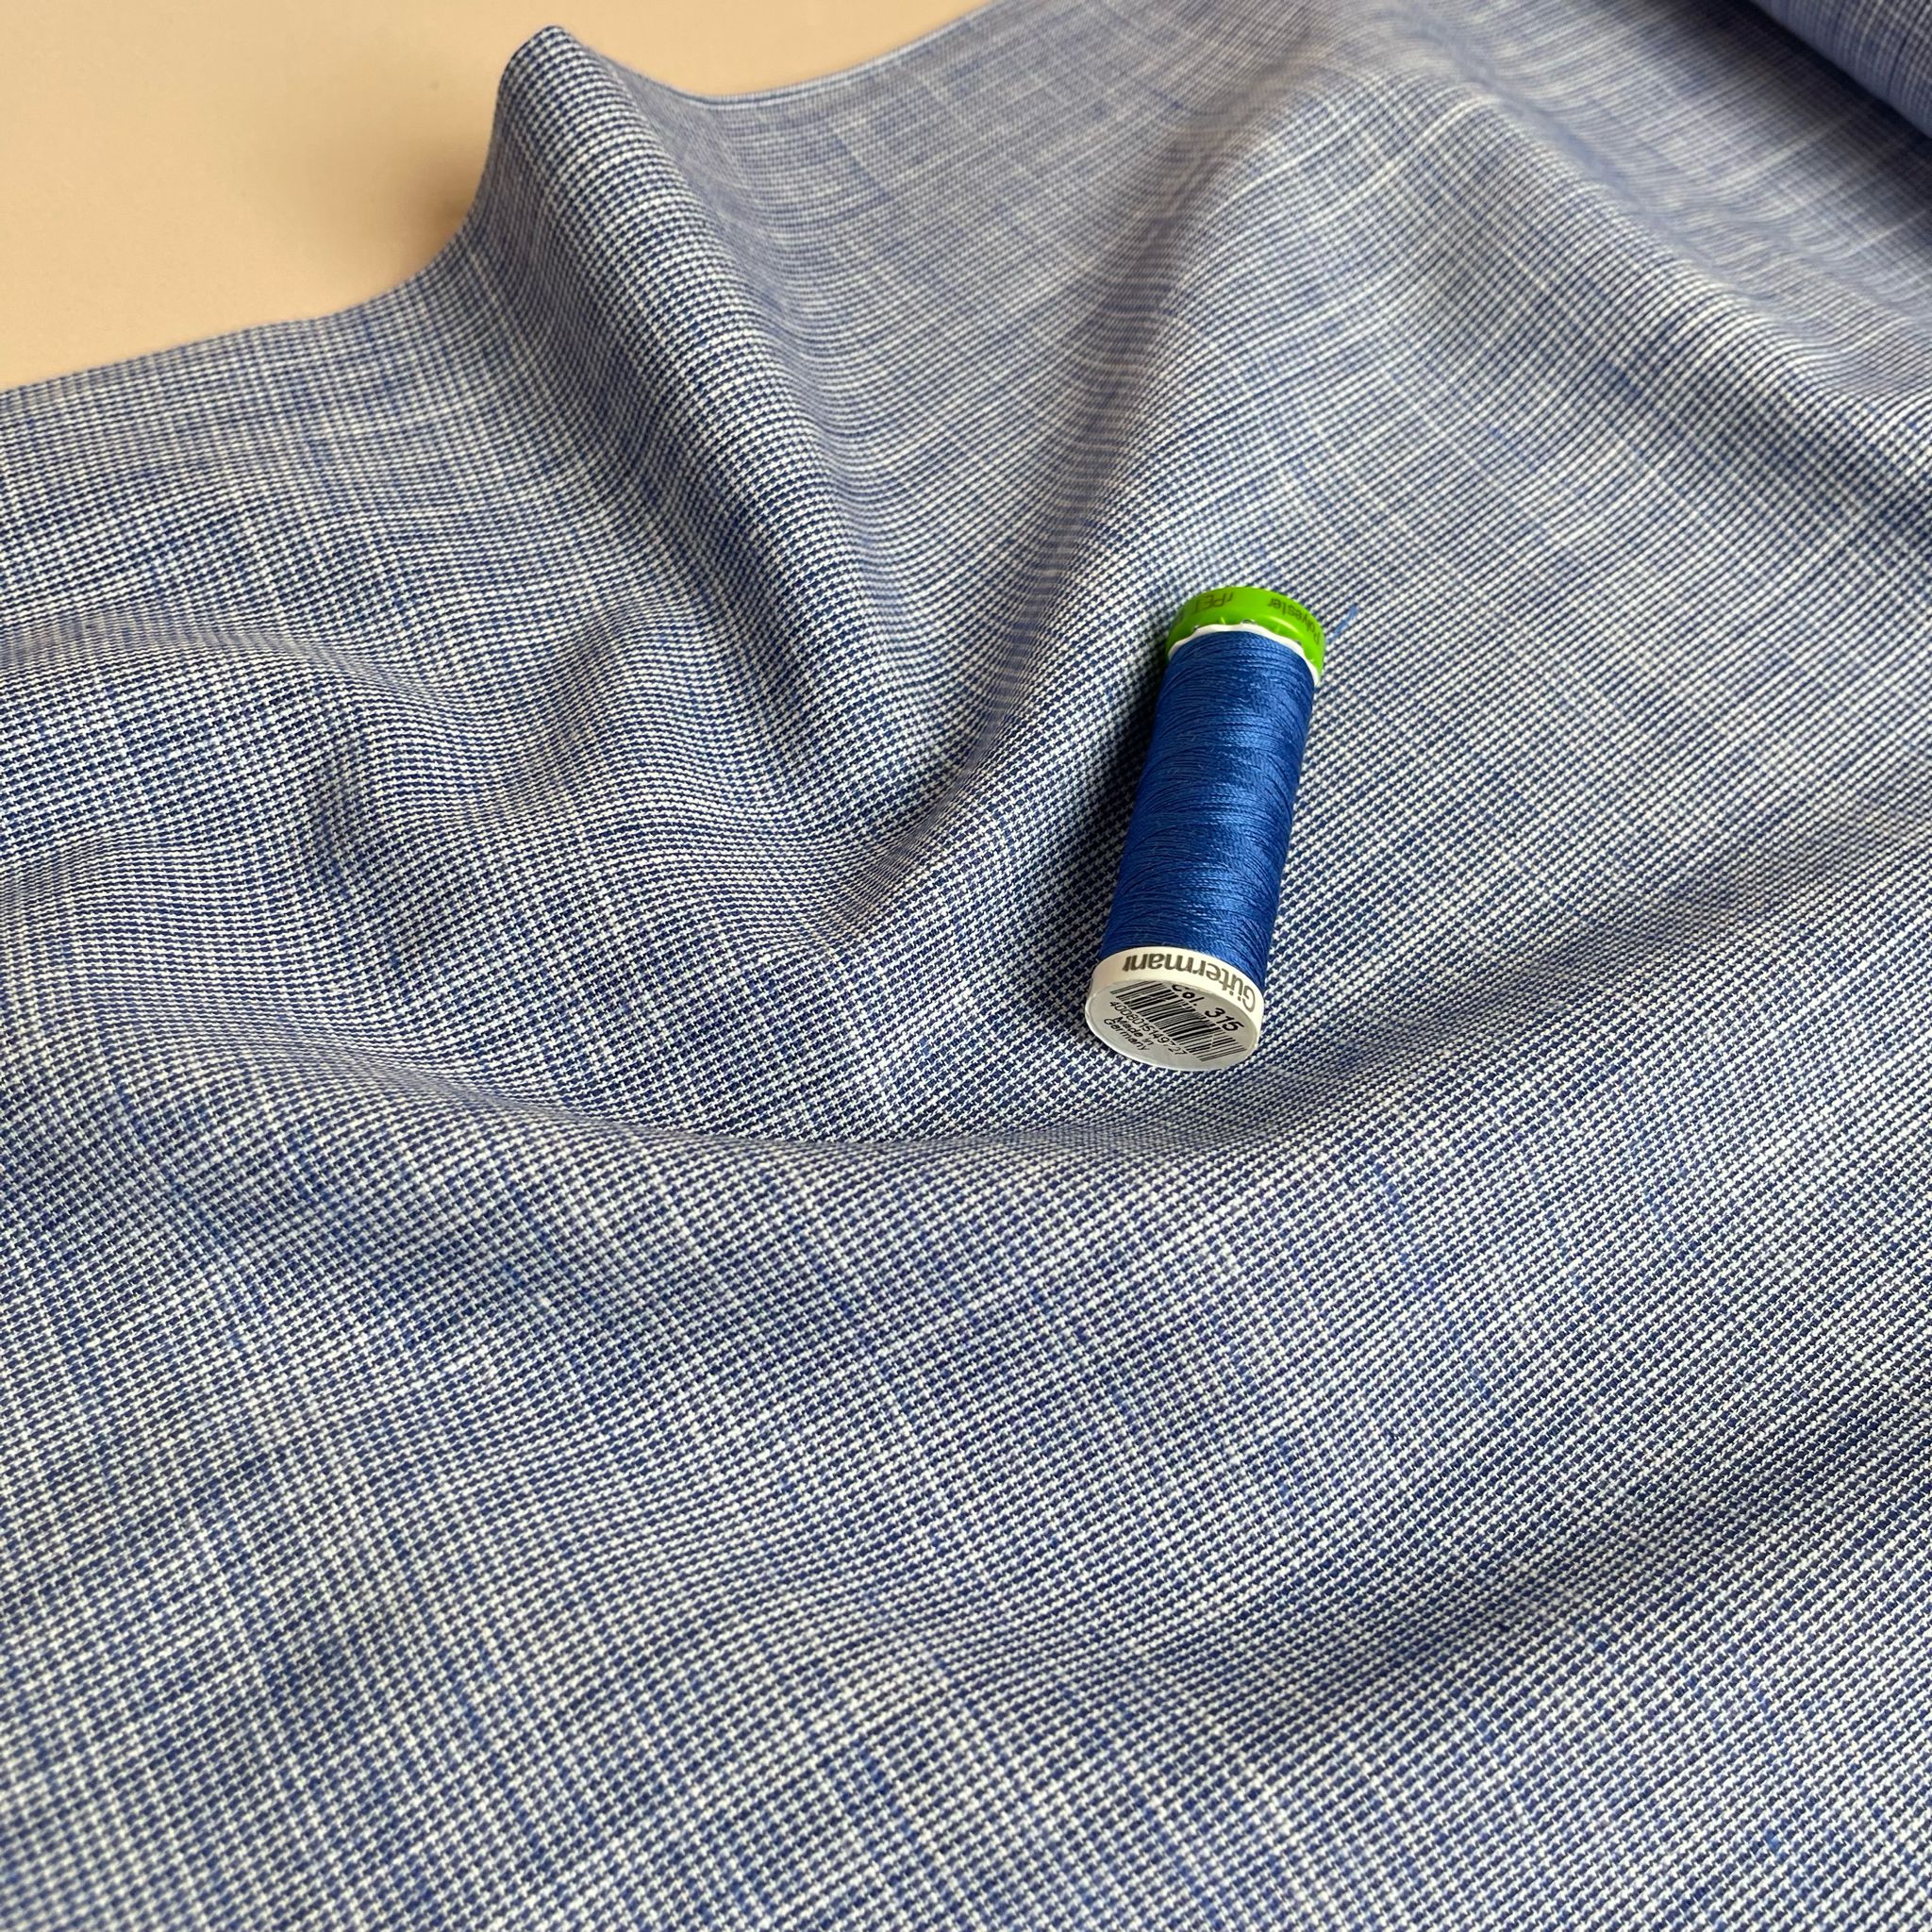 REMNANT 0.84 Metres - Yarn Dyed Blue Puppytooth Weave Cotton Fabric